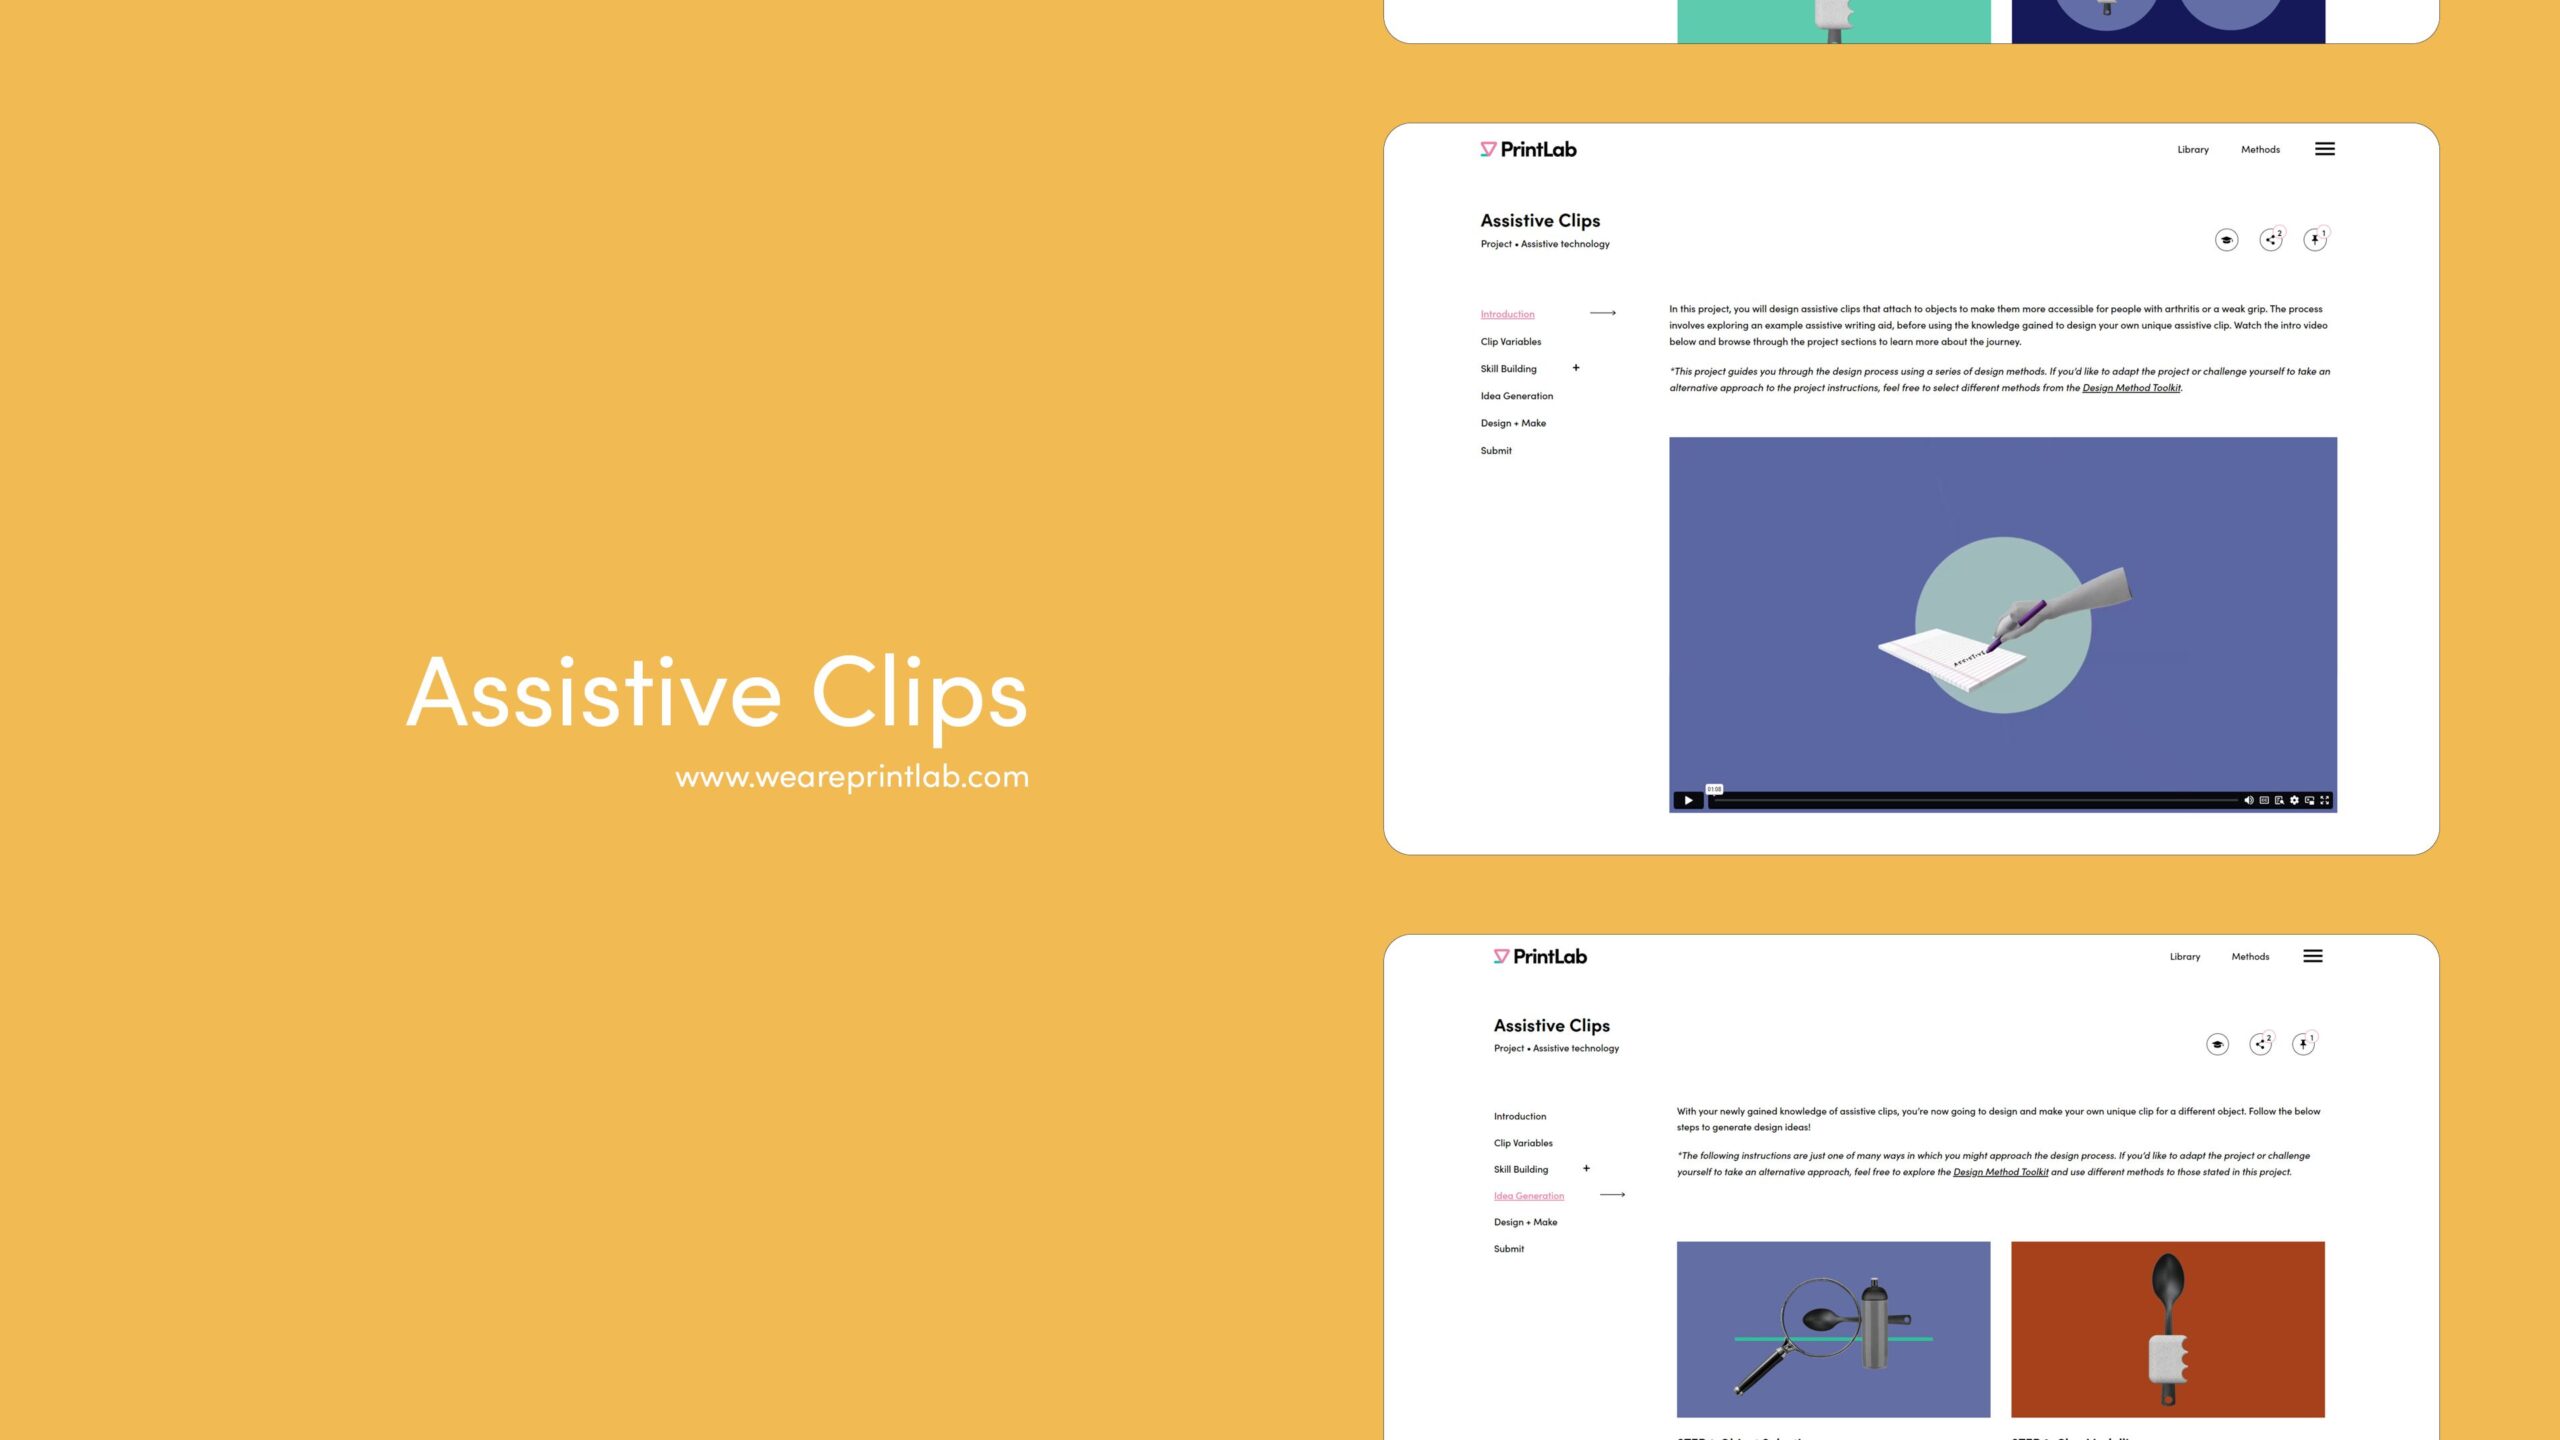 Website screens showing the learning platform for PrintLab's assistive clips project.